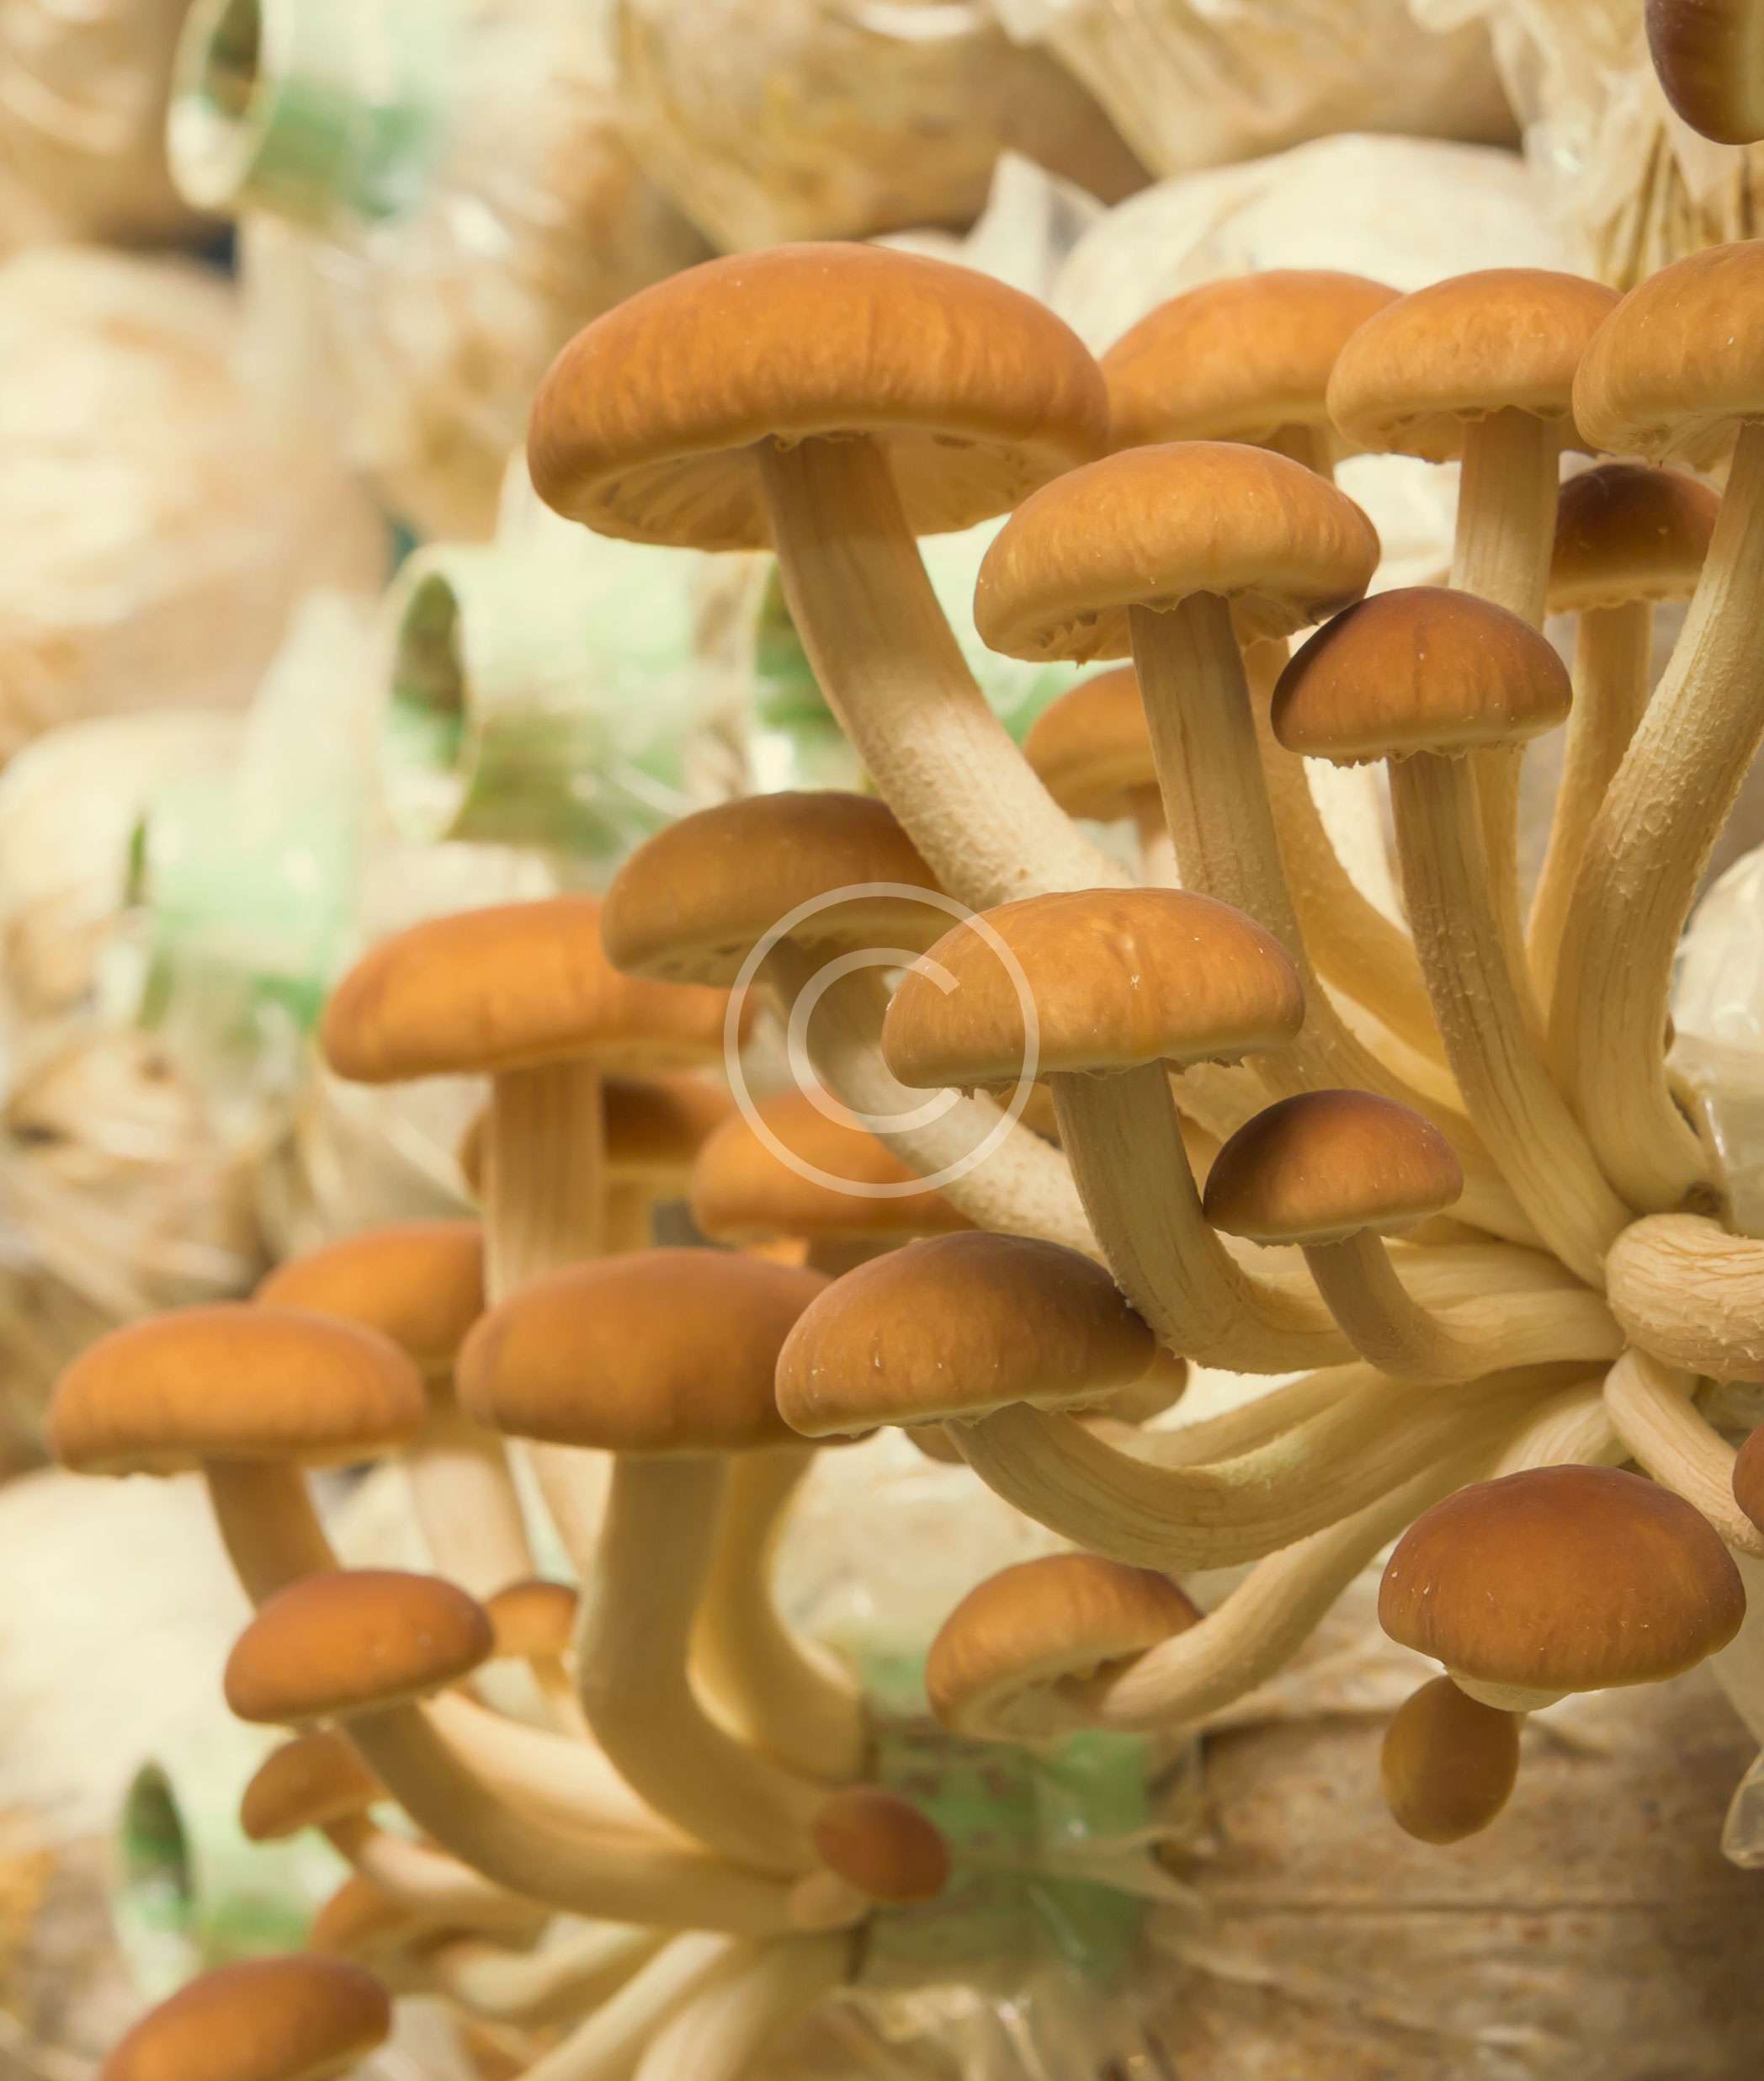 Why Mushrooms Should be Included in Your Menu